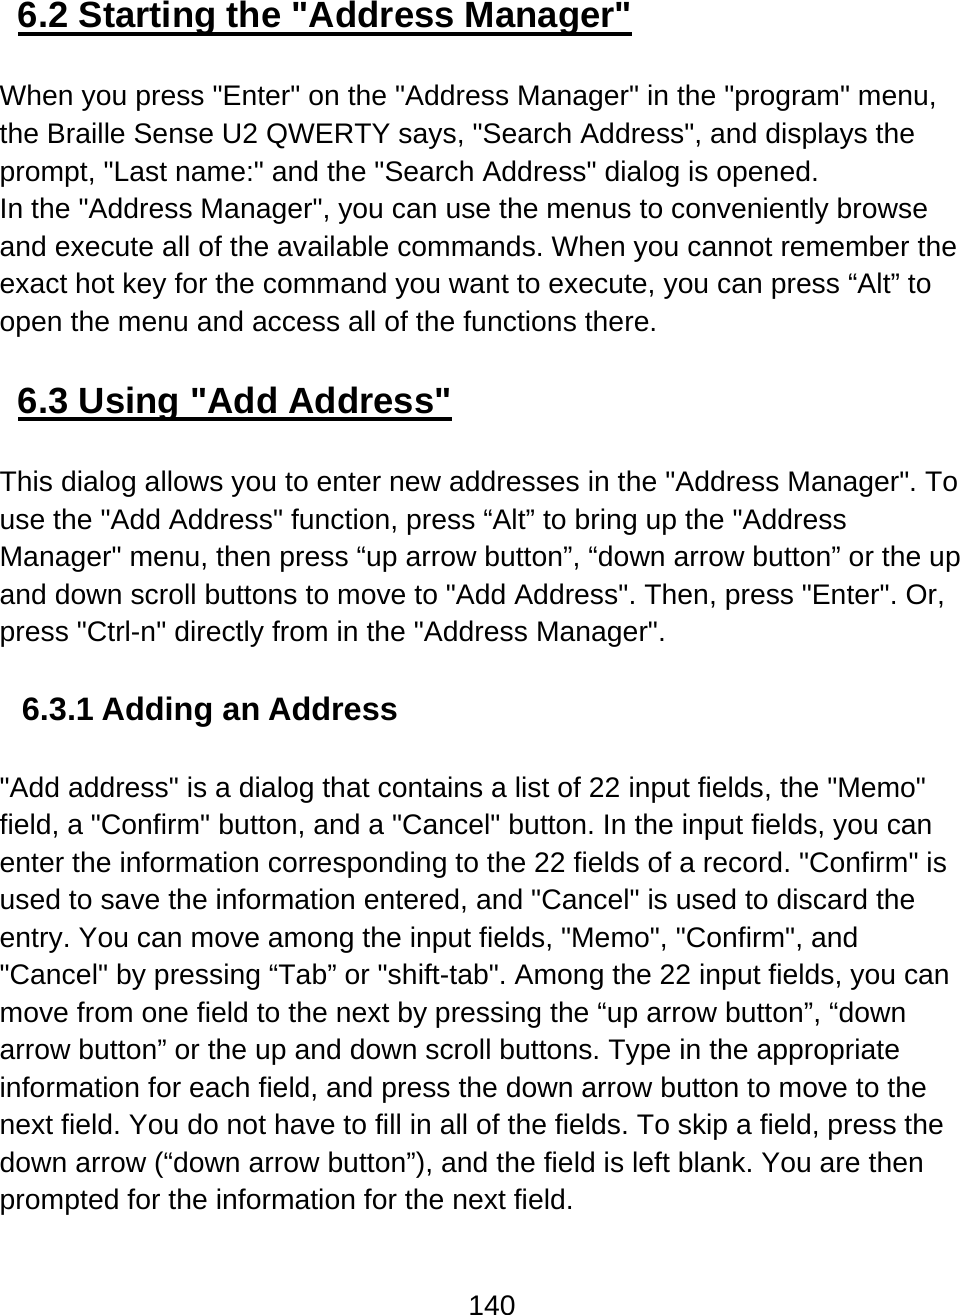 140  6.2 Starting the &quot;Address Manager&quot;  When you press &quot;Enter&quot; on the &quot;Address Manager&quot; in the &quot;program&quot; menu, the Braille Sense U2 QWERTY says, &quot;Search Address&quot;, and displays the prompt, &quot;Last name:&quot; and the &quot;Search Address&quot; dialog is opened. In the &quot;Address Manager&quot;, you can use the menus to conveniently browse and execute all of the available commands. When you cannot remember the exact hot key for the command you want to execute, you can press “Alt” to open the menu and access all of the functions there.  6.3 Using &quot;Add Address&quot;  This dialog allows you to enter new addresses in the &quot;Address Manager&quot;. To use the &quot;Add Address&quot; function, press “Alt” to bring up the &quot;Address Manager&quot; menu, then press “up arrow button”, “down arrow button” or the up and down scroll buttons to move to &quot;Add Address&quot;. Then, press &quot;Enter&quot;. Or, press &quot;Ctrl-n&quot; directly from in the &quot;Address Manager&quot;.   6.3.1 Adding an Address  &quot;Add address&quot; is a dialog that contains a list of 22 input fields, the &quot;Memo&quot; field, a &quot;Confirm&quot; button, and a &quot;Cancel&quot; button. In the input fields, you can enter the information corresponding to the 22 fields of a record. &quot;Confirm&quot; is used to save the information entered, and &quot;Cancel&quot; is used to discard the entry. You can move among the input fields, &quot;Memo&quot;, &quot;Confirm&quot;, and &quot;Cancel&quot; by pressing “Tab” or &quot;shift-tab&quot;. Among the 22 input fields, you can move from one field to the next by pressing the “up arrow button”, “down arrow button” or the up and down scroll buttons. Type in the appropriate information for each field, and press the down arrow button to move to the next field. You do not have to fill in all of the fields. To skip a field, press the down arrow (“down arrow button”), and the field is left blank. You are then prompted for the information for the next field. 